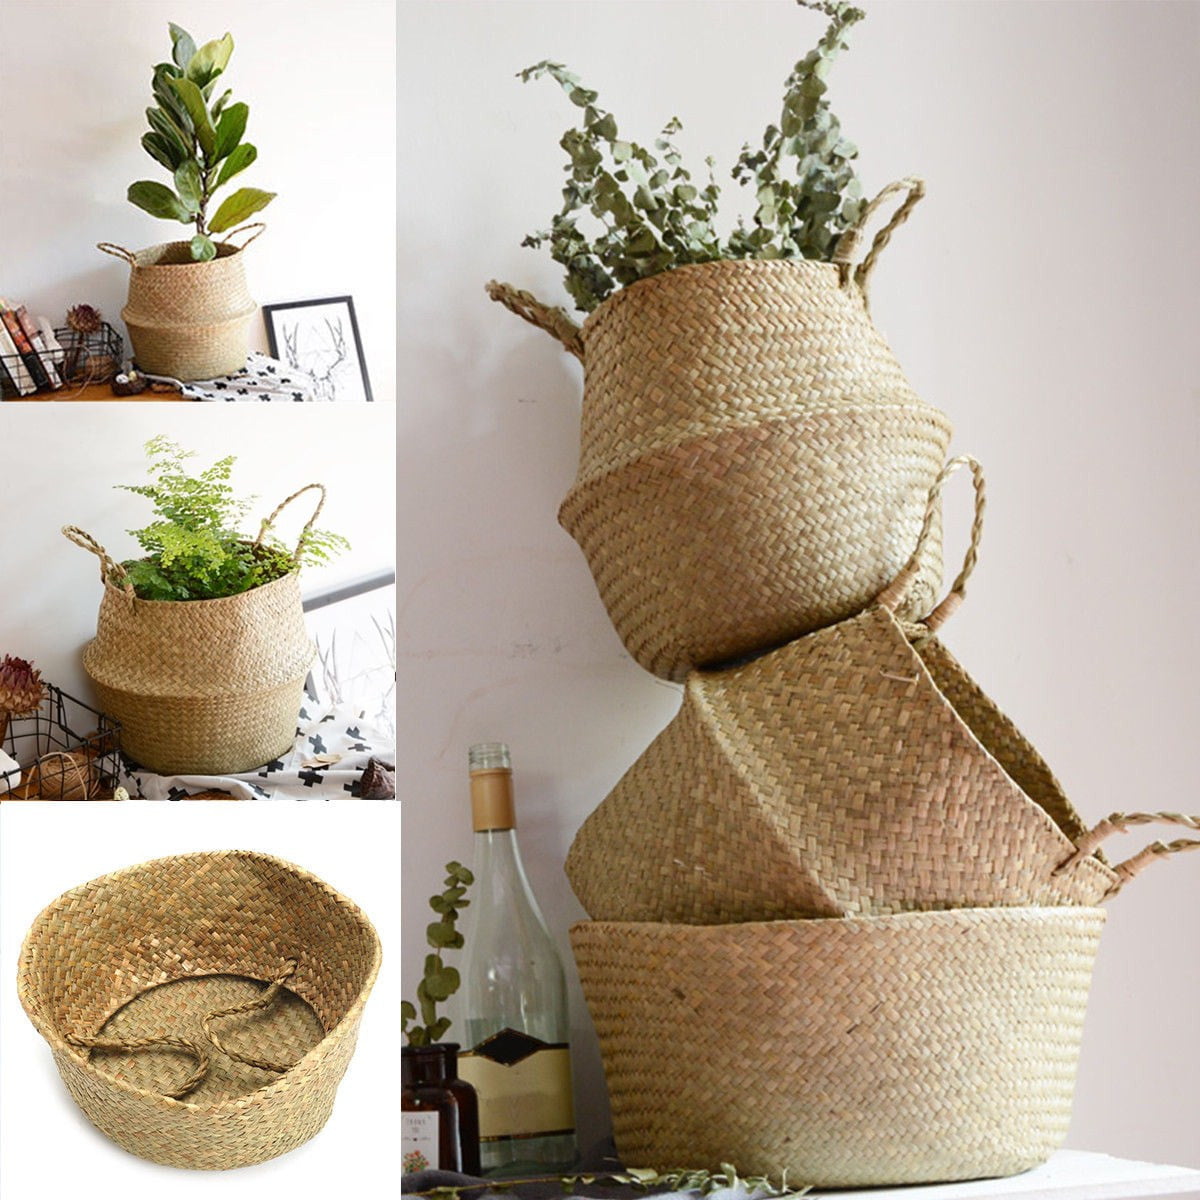 BEKKAU Belly Basket Grocery hand woven in Bali Picnic Plant Pot Basket Made with seagrass Laundry Beach Bag Storage